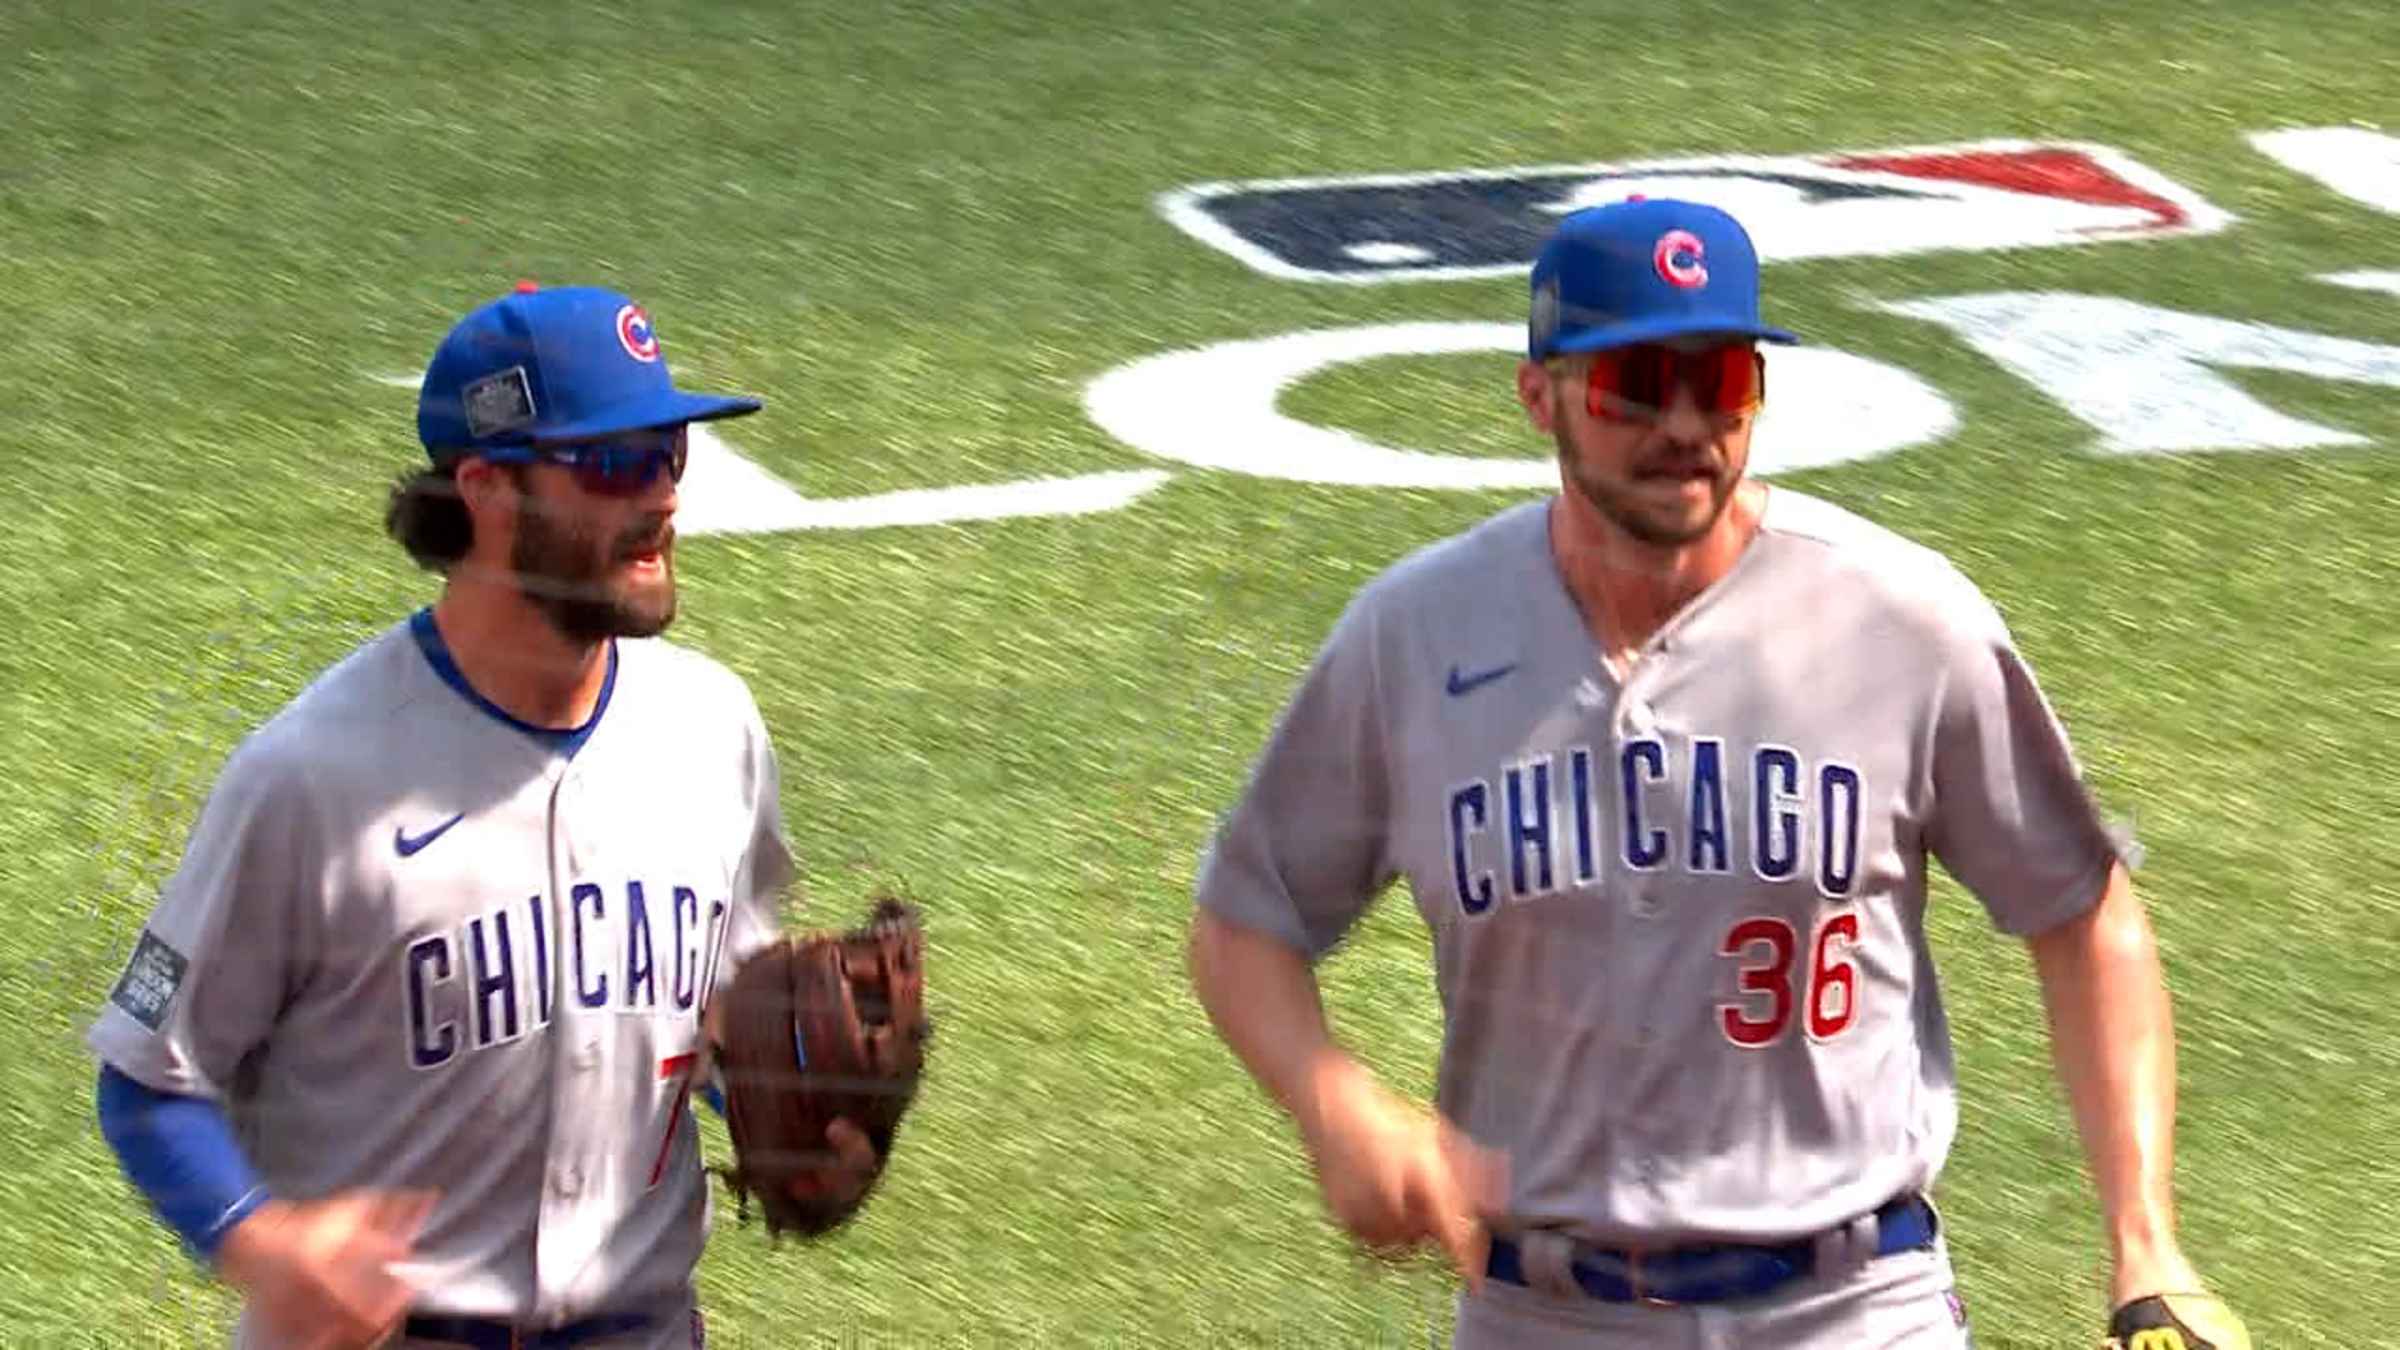 Tucker Barnhart Delights Chicago Cubs, MLB Fans With 39-mph Strike